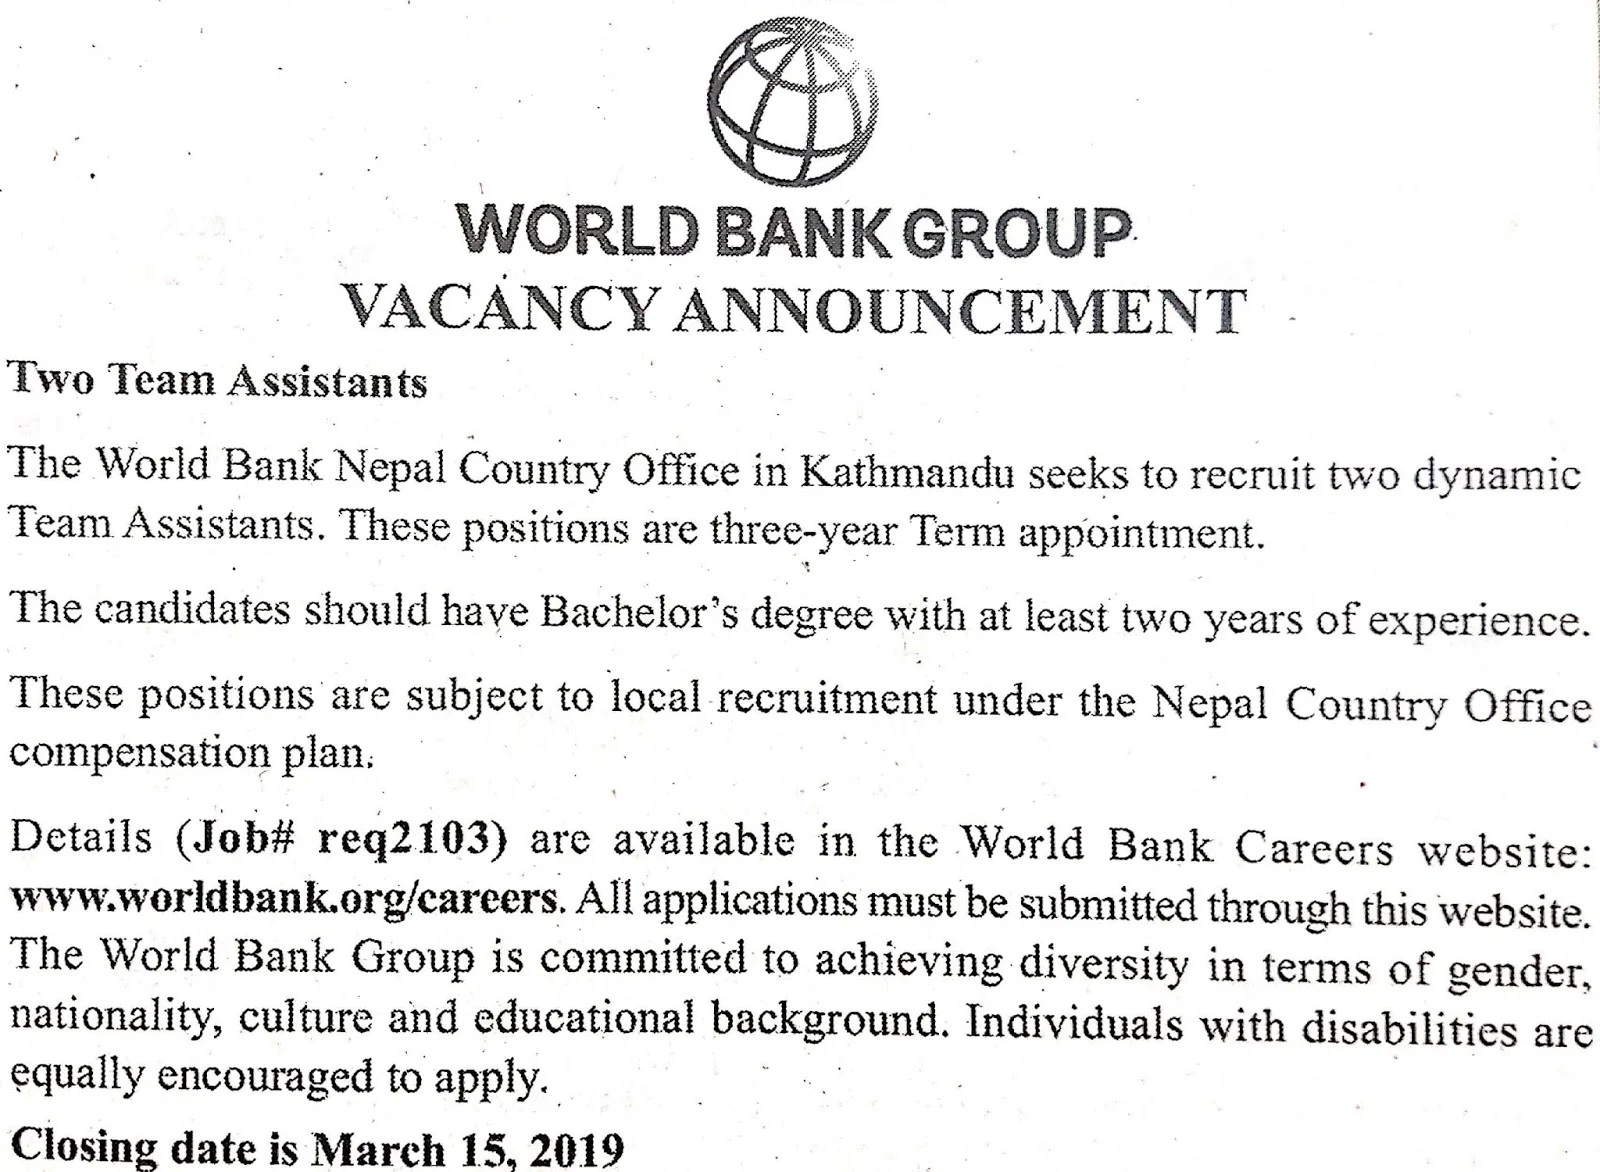 World Bank Group Vacancy Notice for Team Assistant.